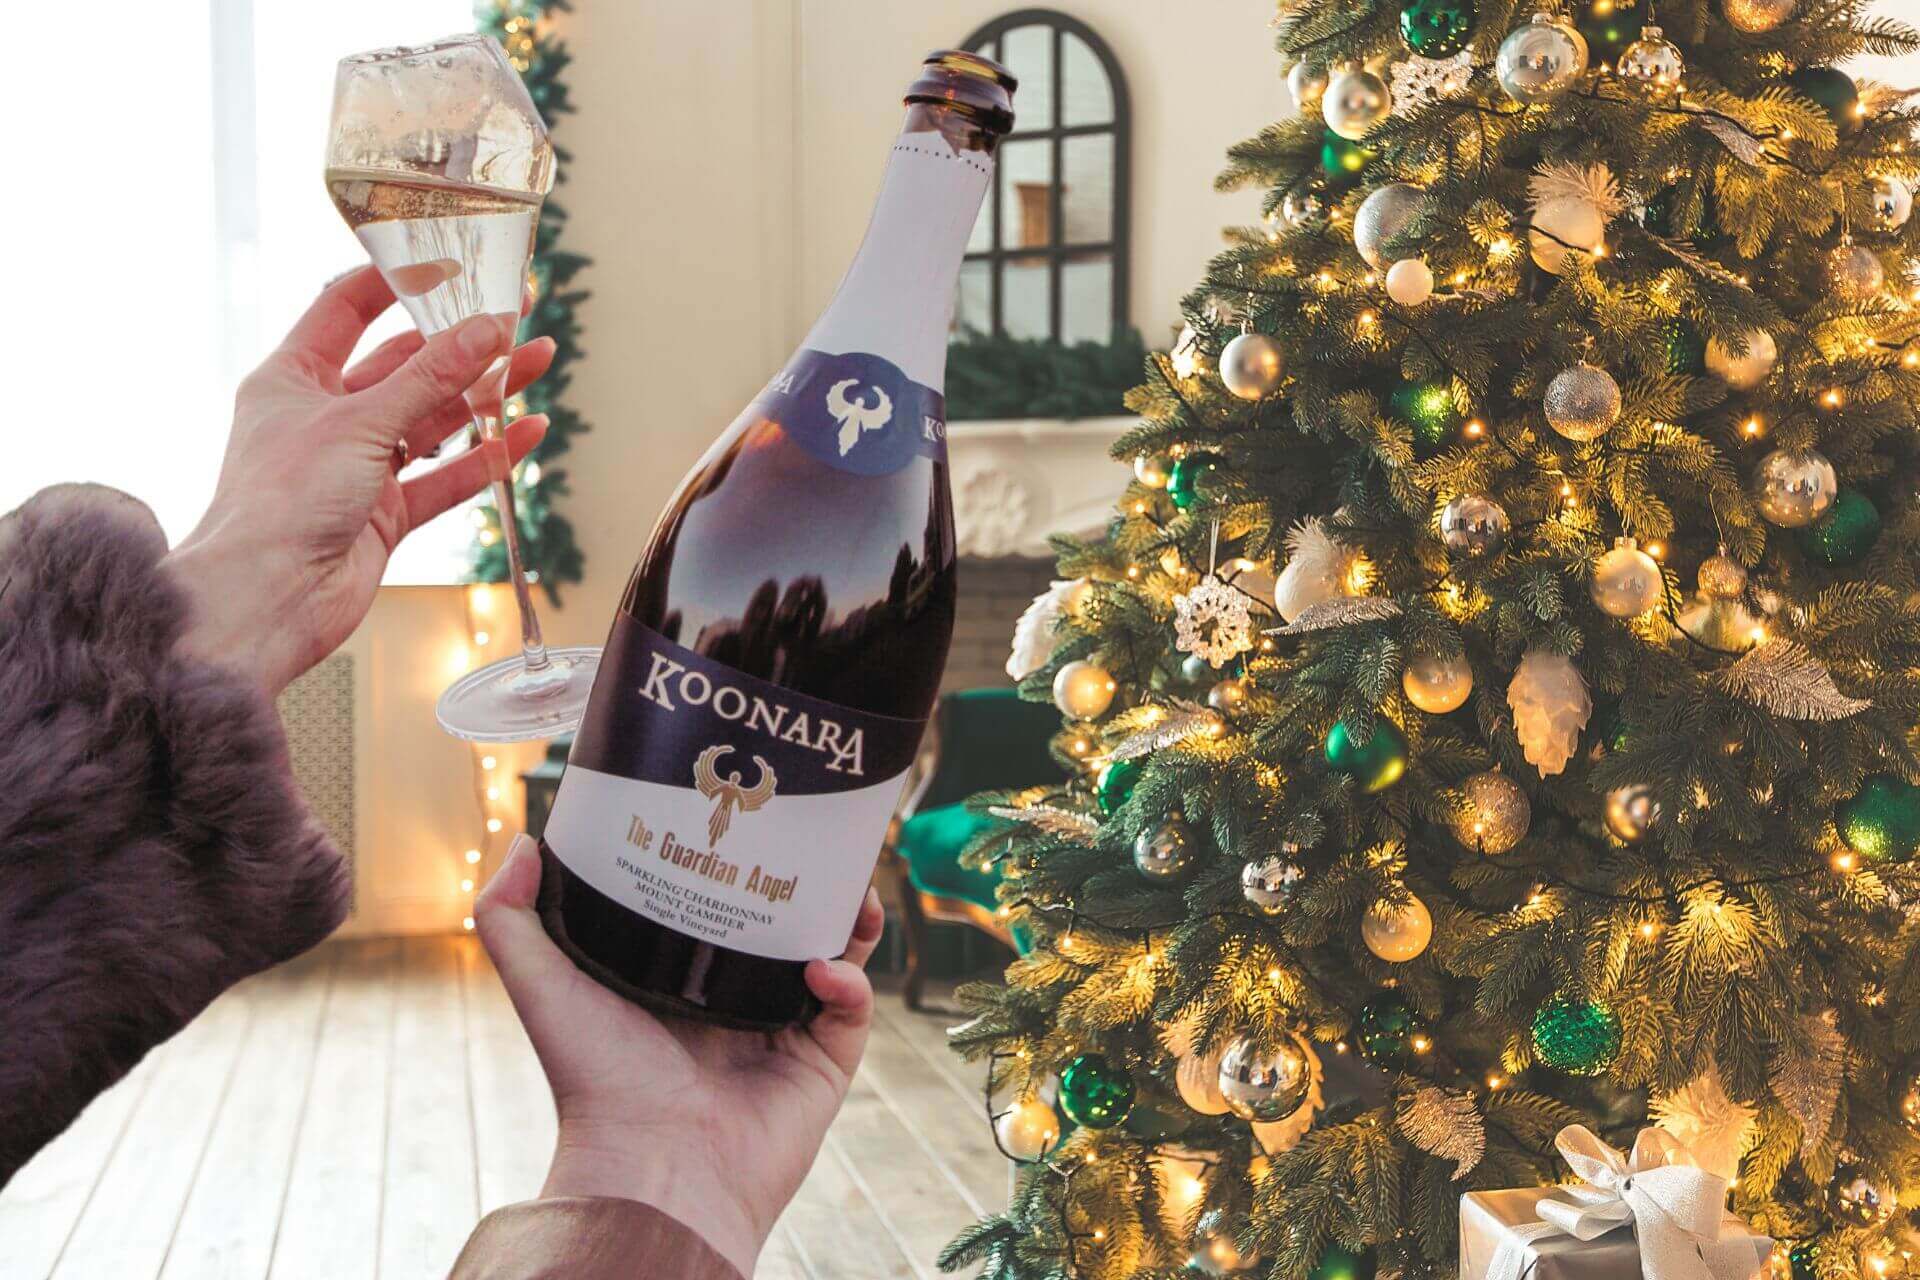 A woman is holding a bottle of Guardian Angel Sparkling Chardonnay by Koonara Wines in front of a Christmas tree.